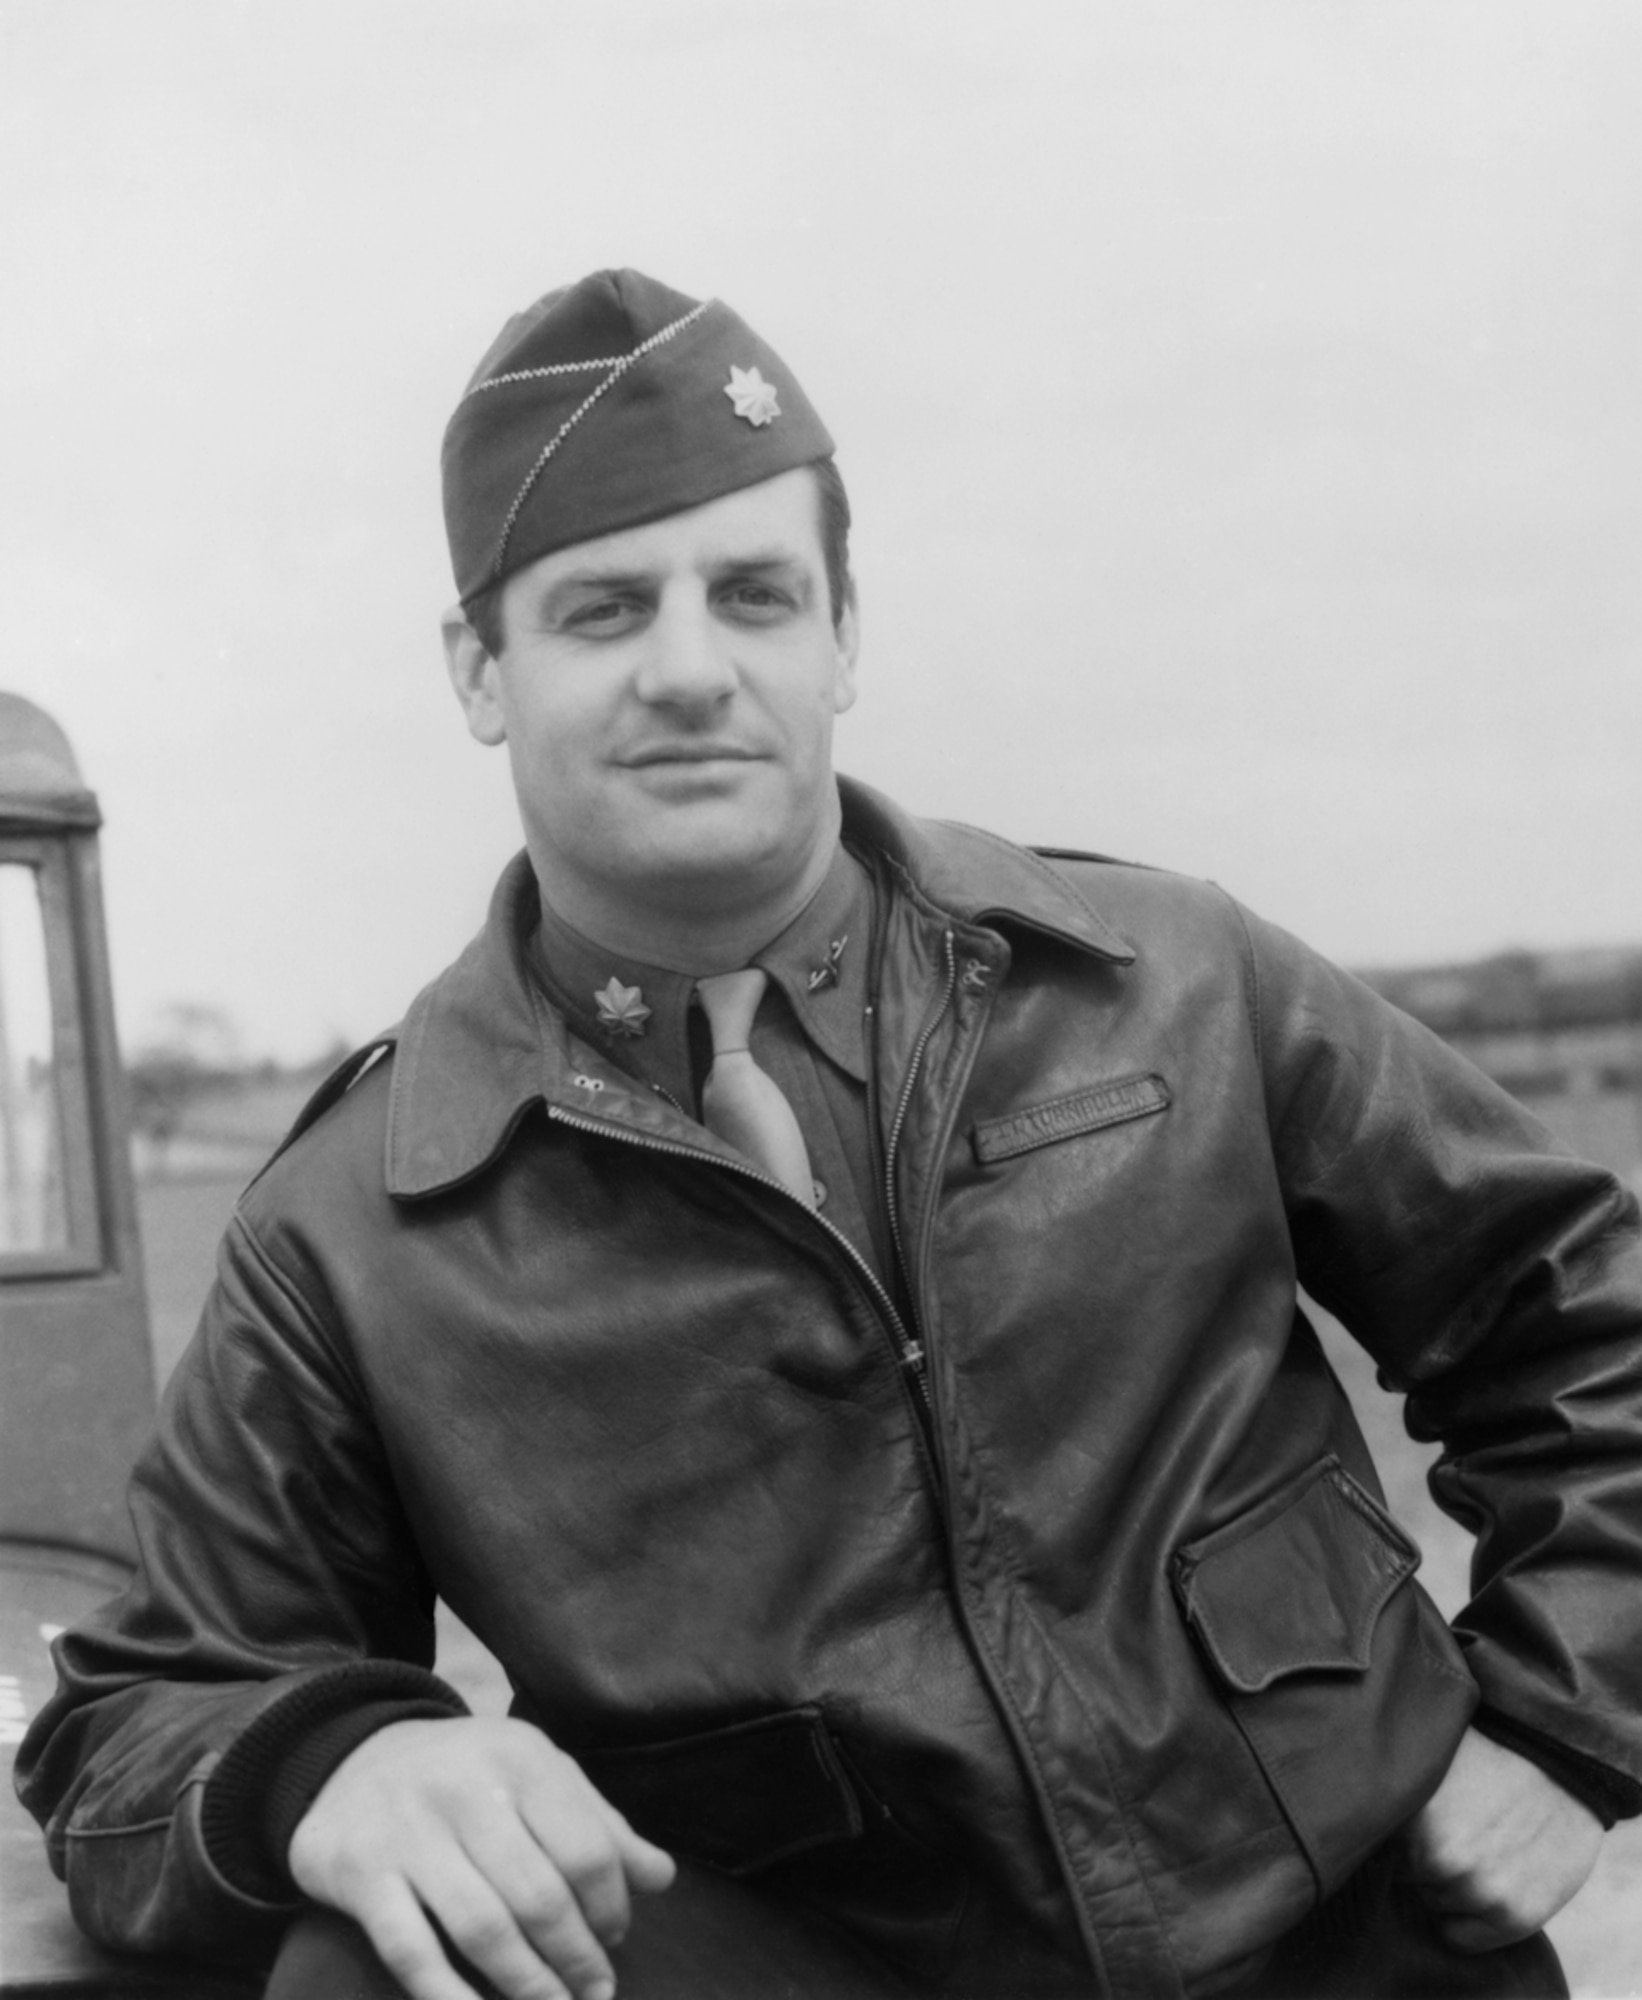 John Inglehart "Jack" Turnbull was a noted athlete and member of the Maryland National Guard. He was killed in action during a bombing mission over Europe.